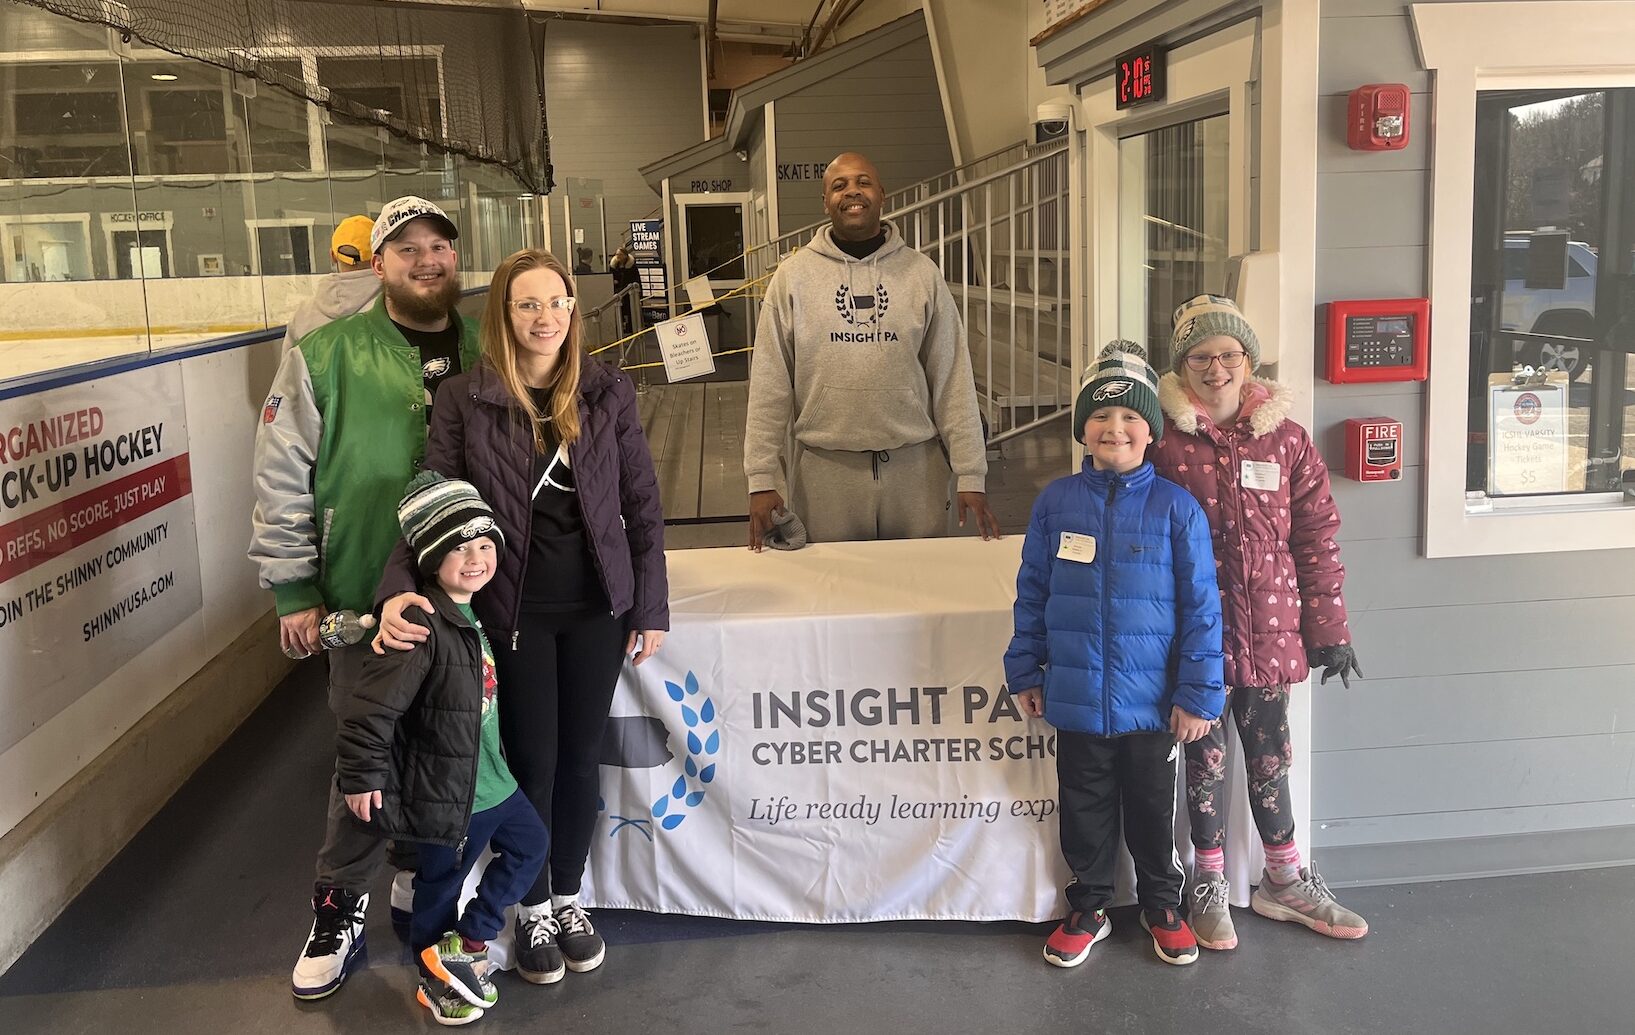 Insight PA students and family members are at a skating event. They are standing at a table that says Insight PA with a staff member behind the table.